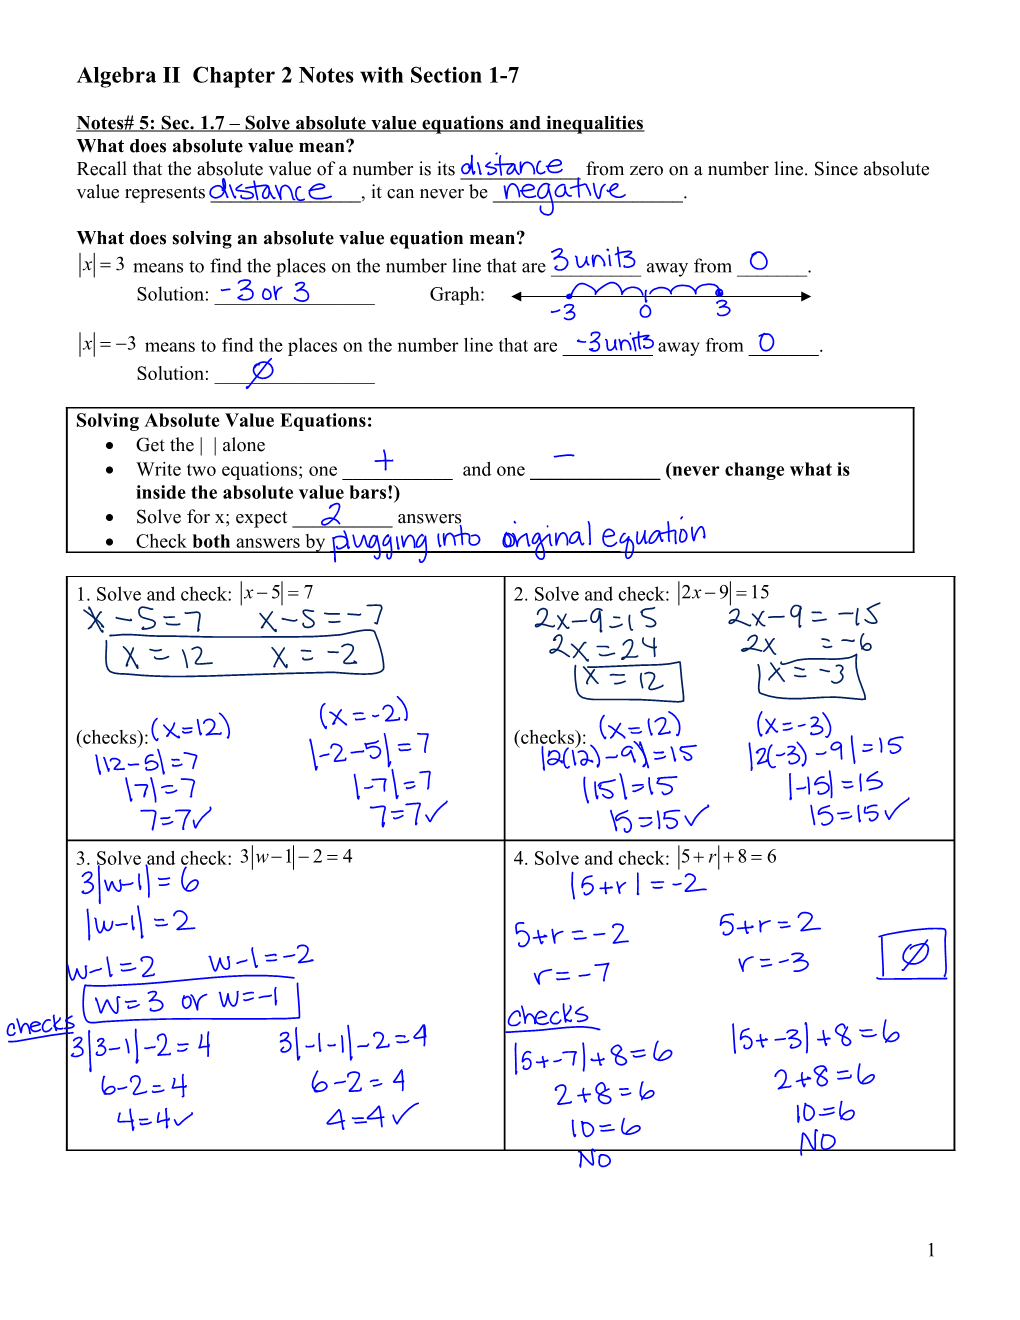 Algebra II Chapter 2 Notes with Section 1-7